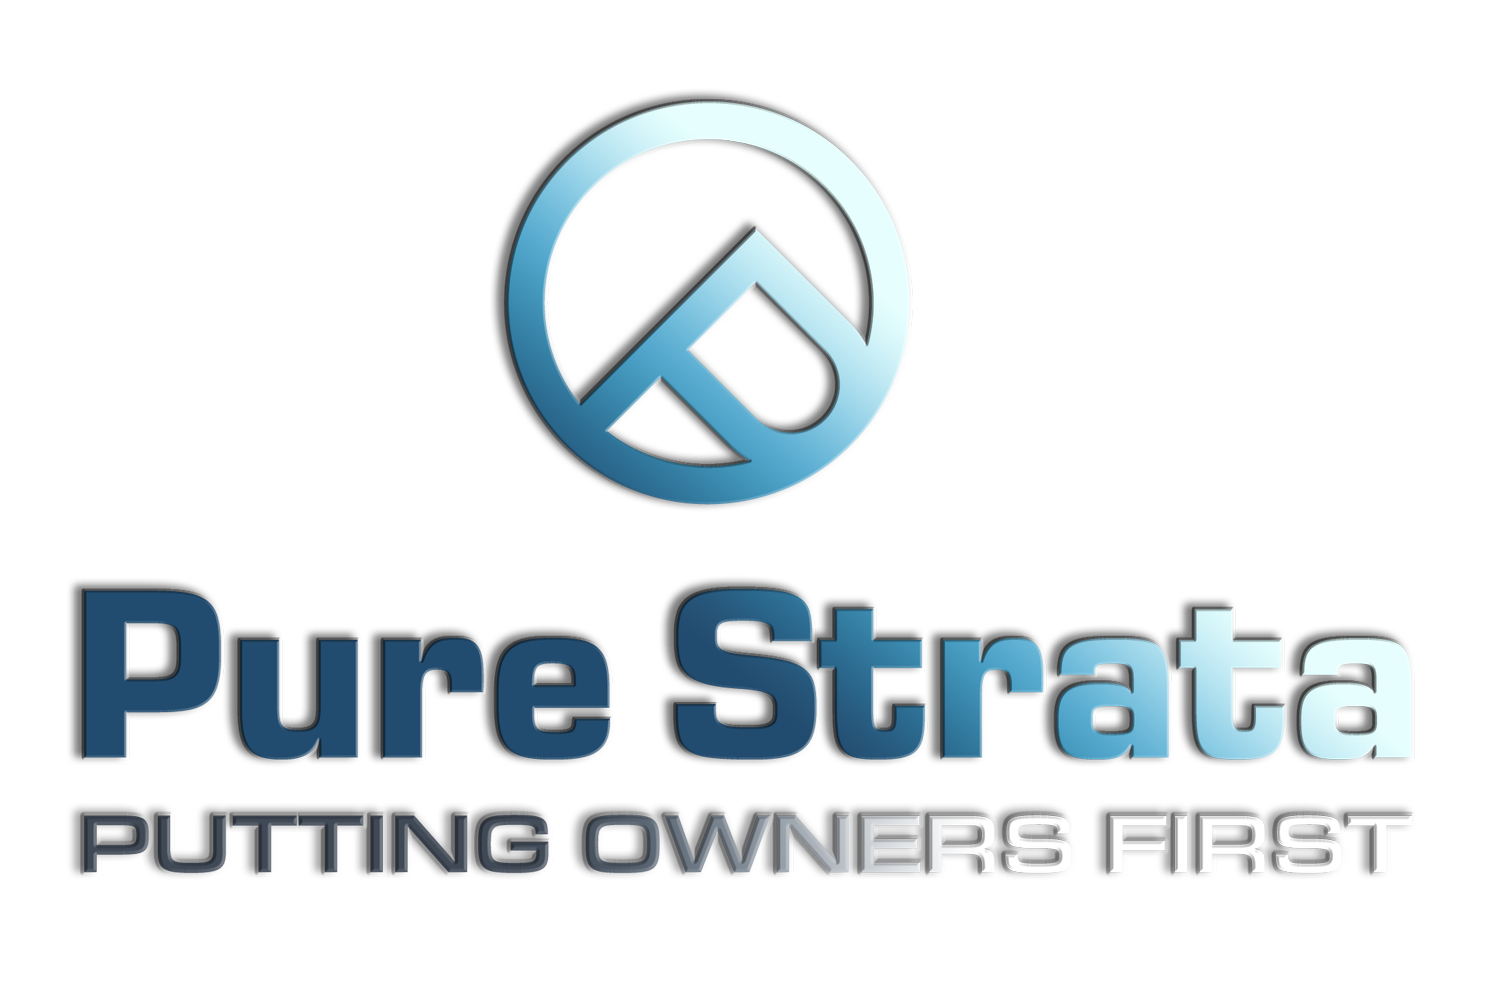 Pure Strata - Putting Owners First